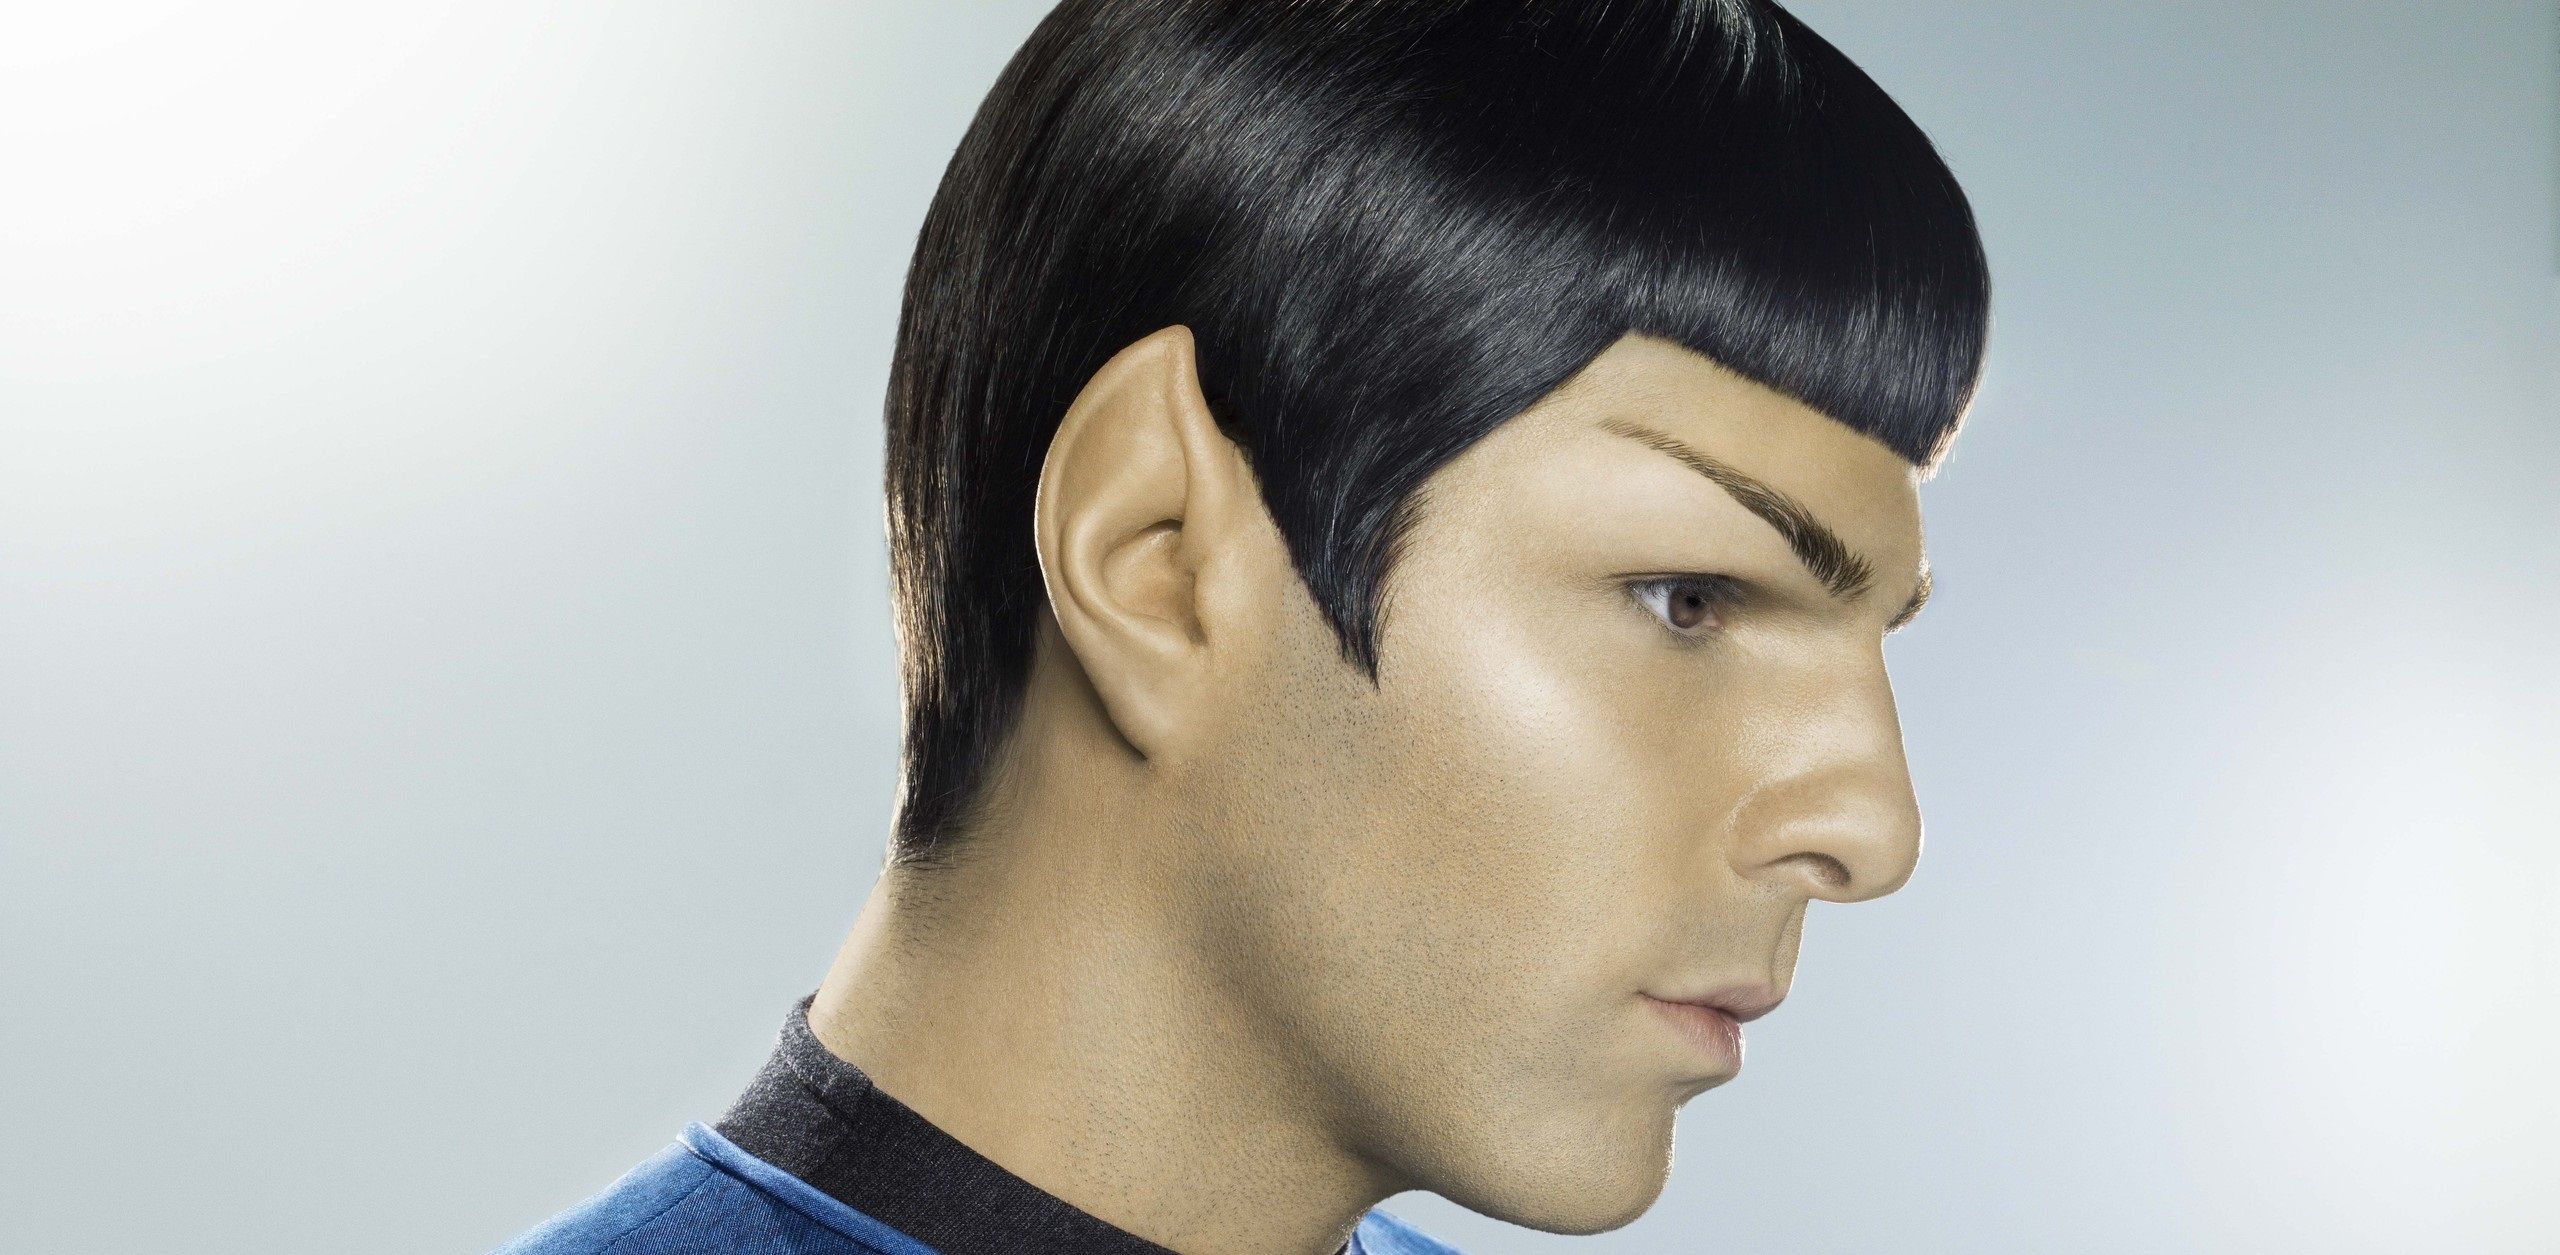 Zachary Quinto showing off his ears as Spock in Star Trek.